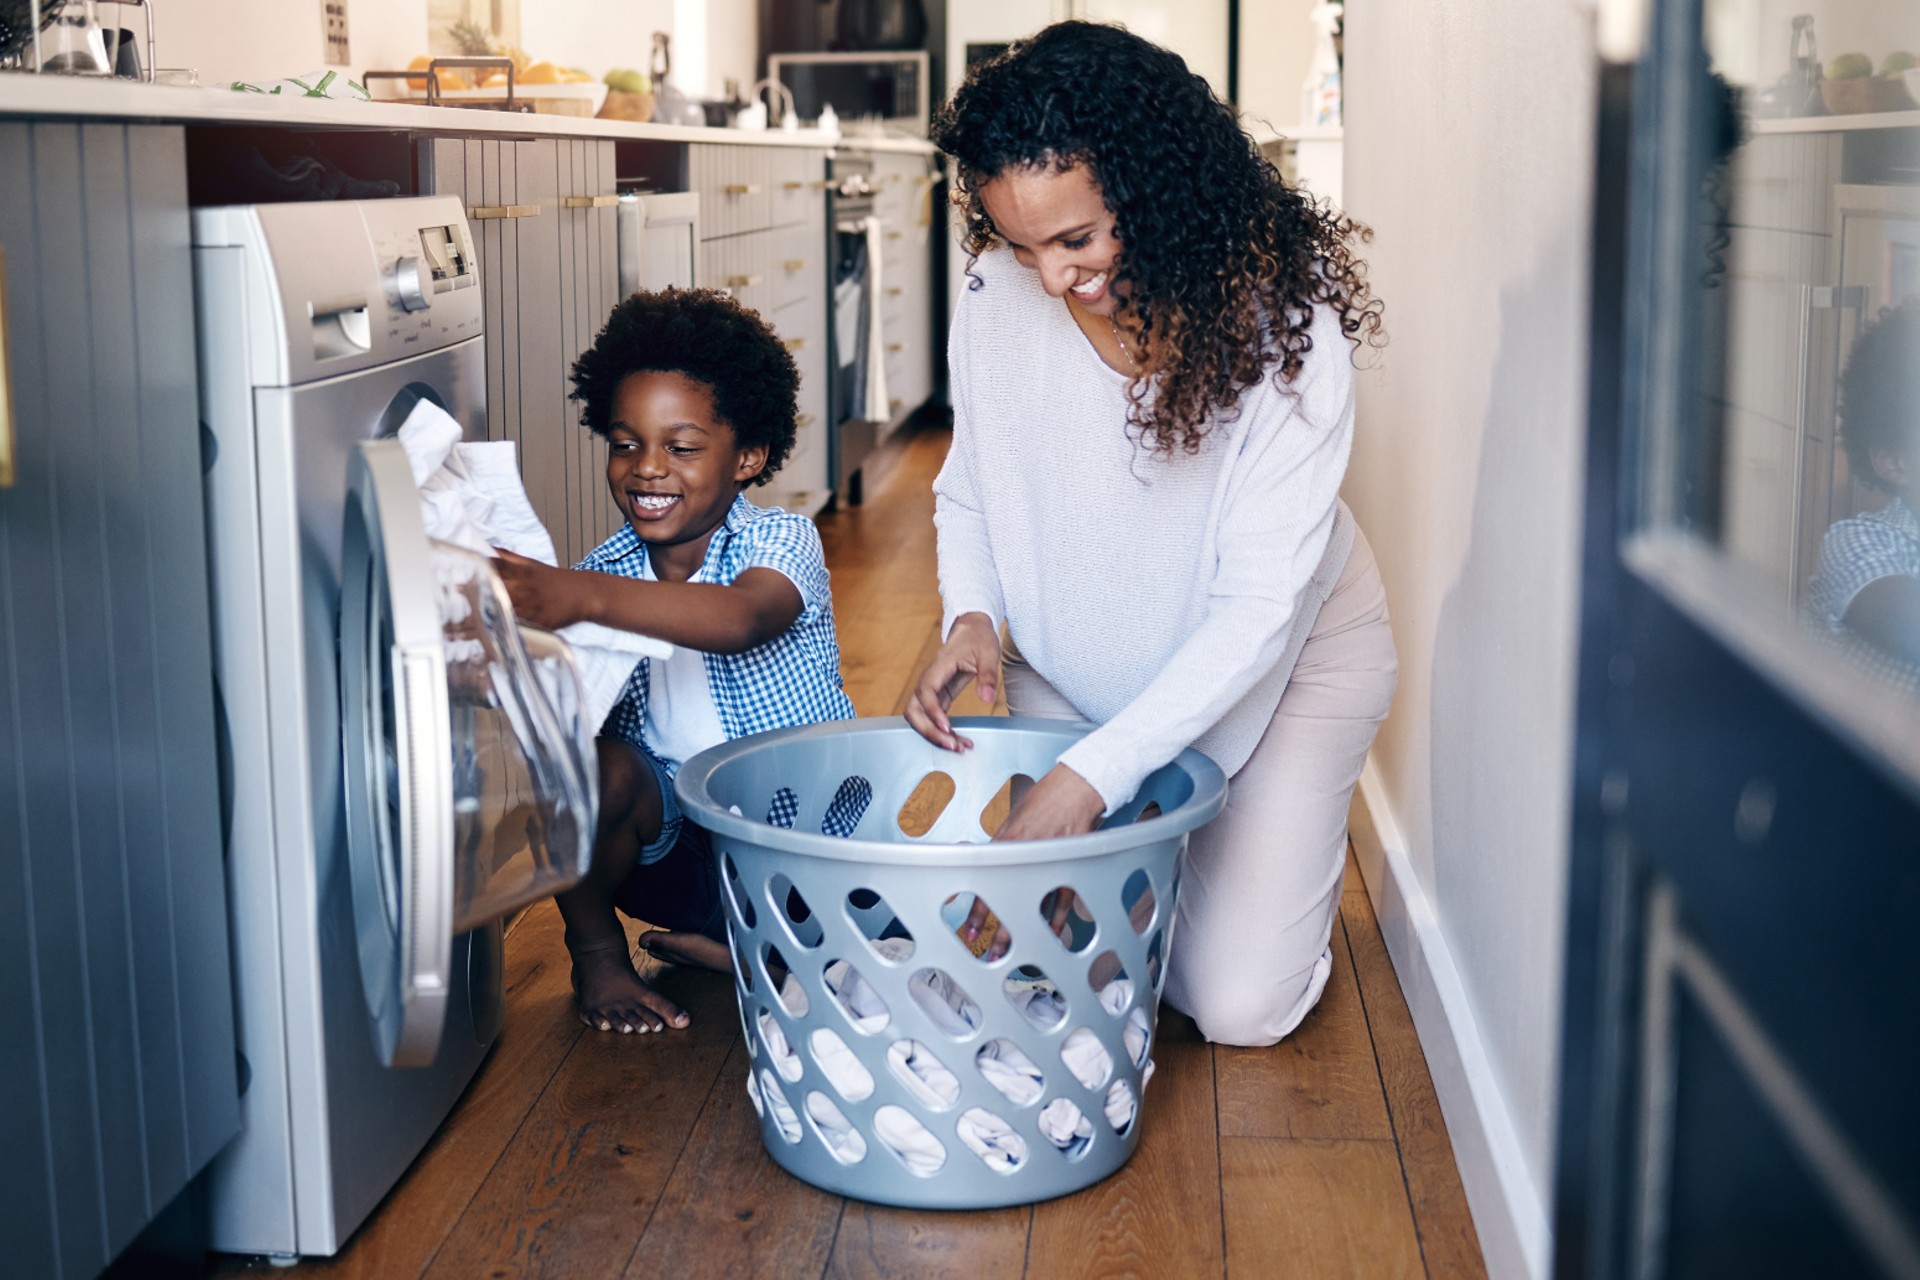 parent and child working on laundry together looking happy